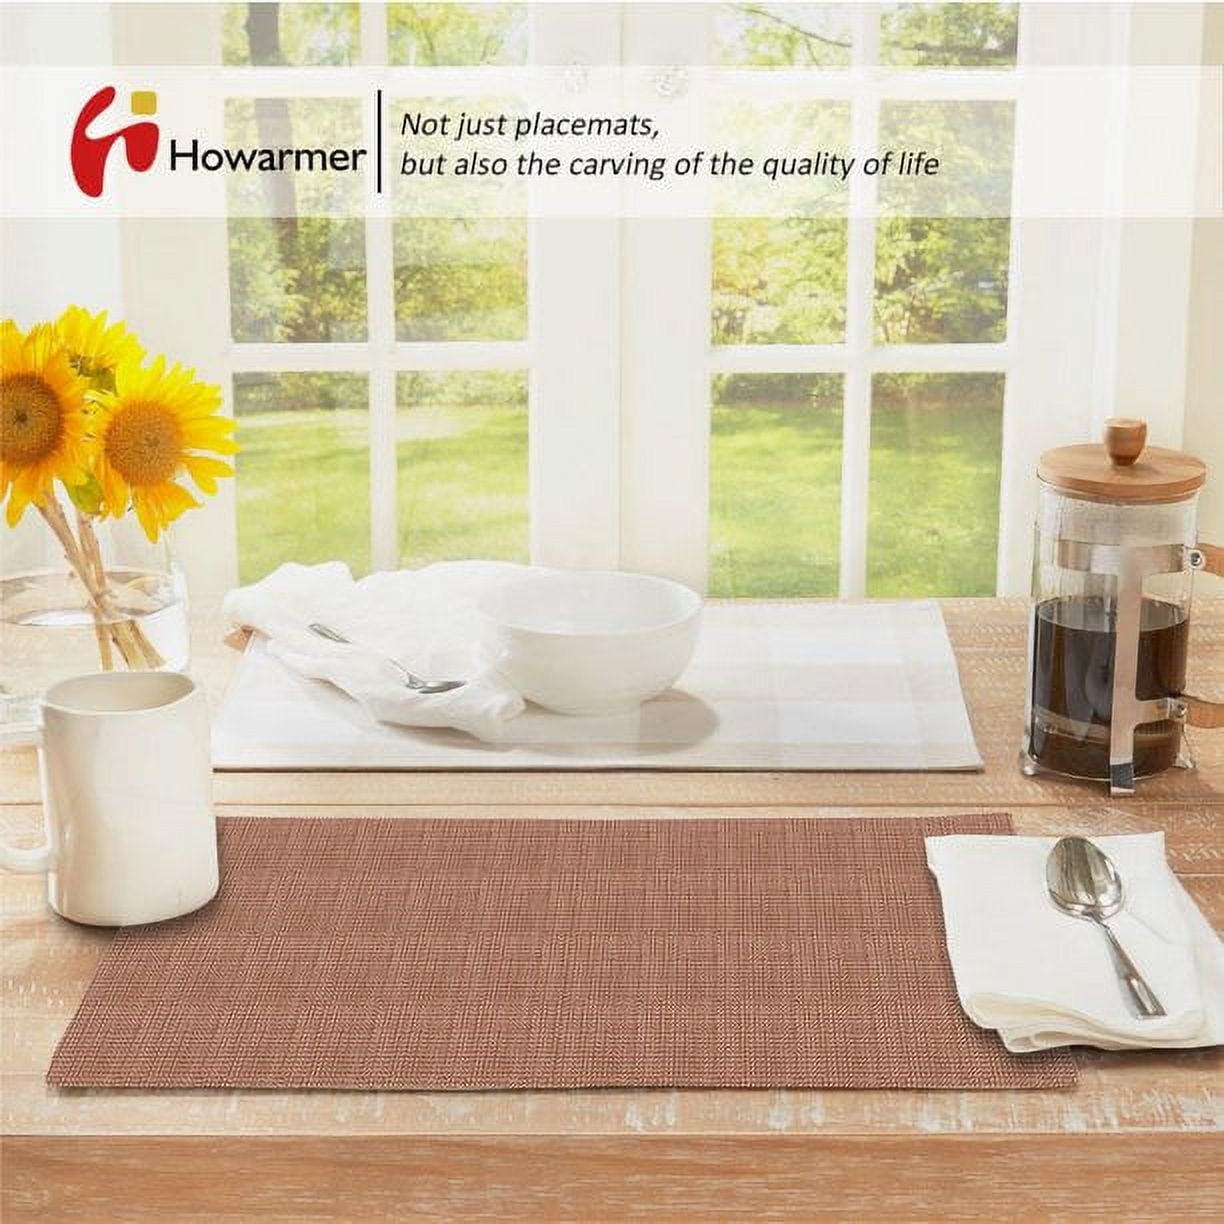 4/8x Washable Clear Placemats Heat Resistant Dining Non-Slip Table Mats  16x12